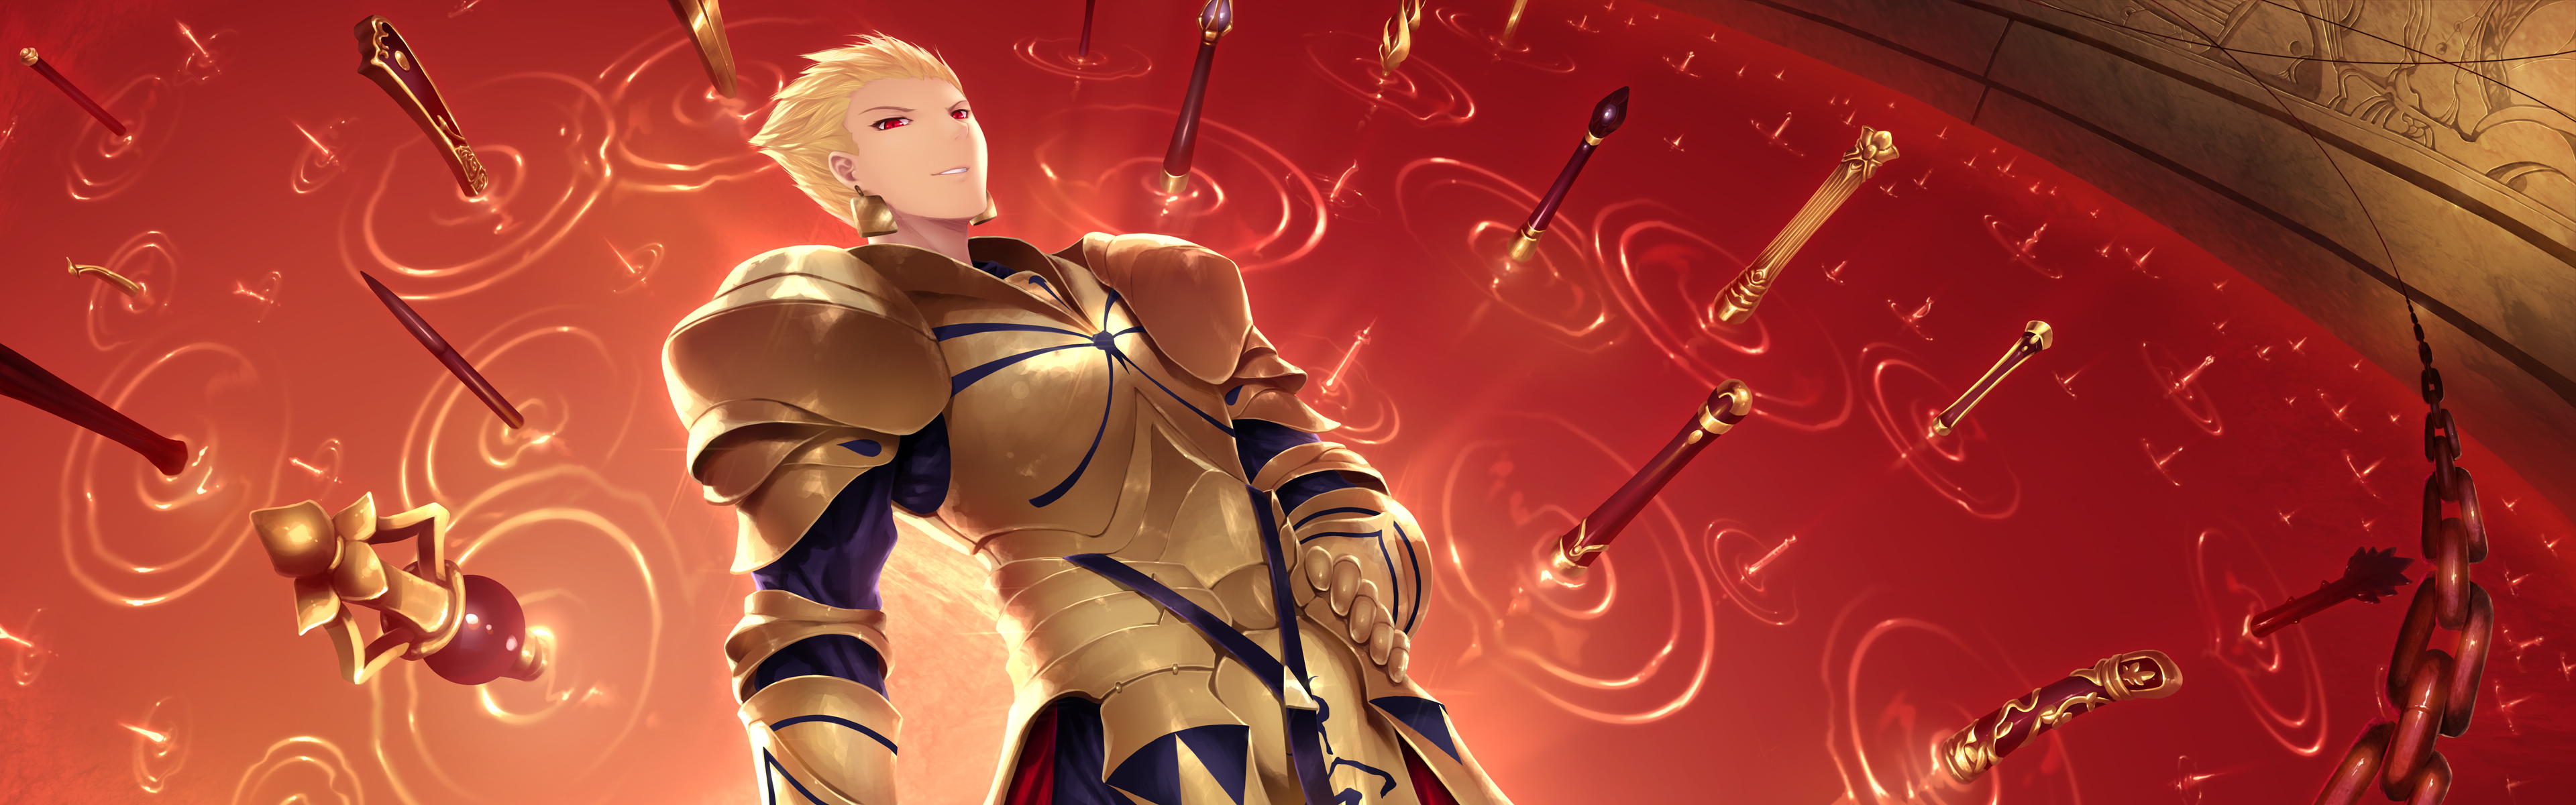 Wallpaper anime, art, guy, Fate Stay Night, Gilgamesh, Archer for mobile  and desktop, section прочее, resolution 2480x1550 - download